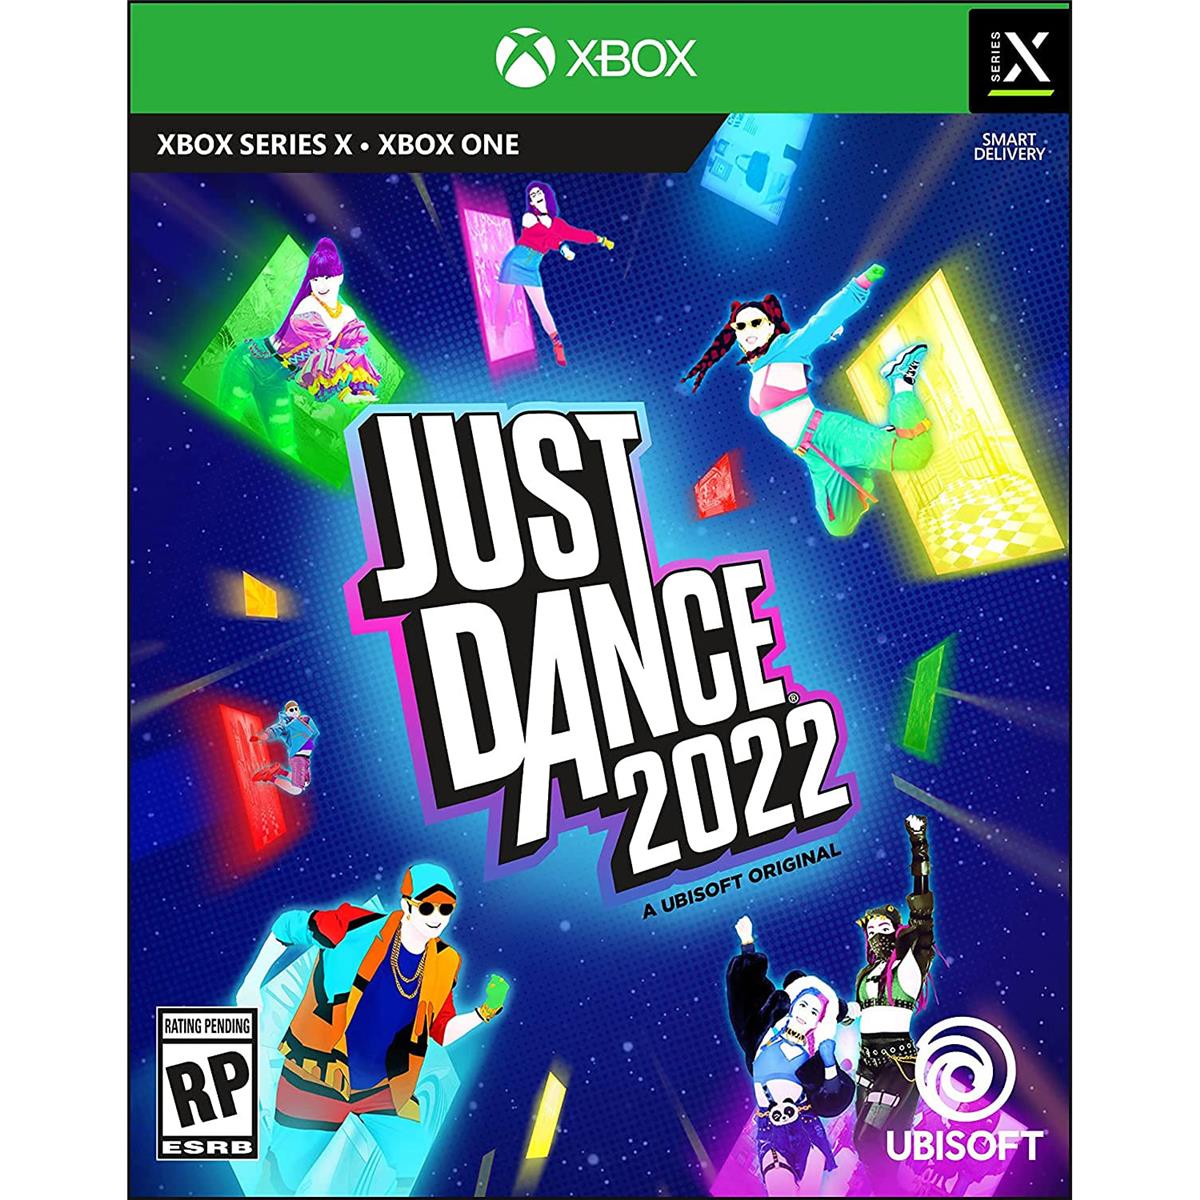 Image of Ubisoft Just Dance 2022 for Xbox One and Xbox Series X